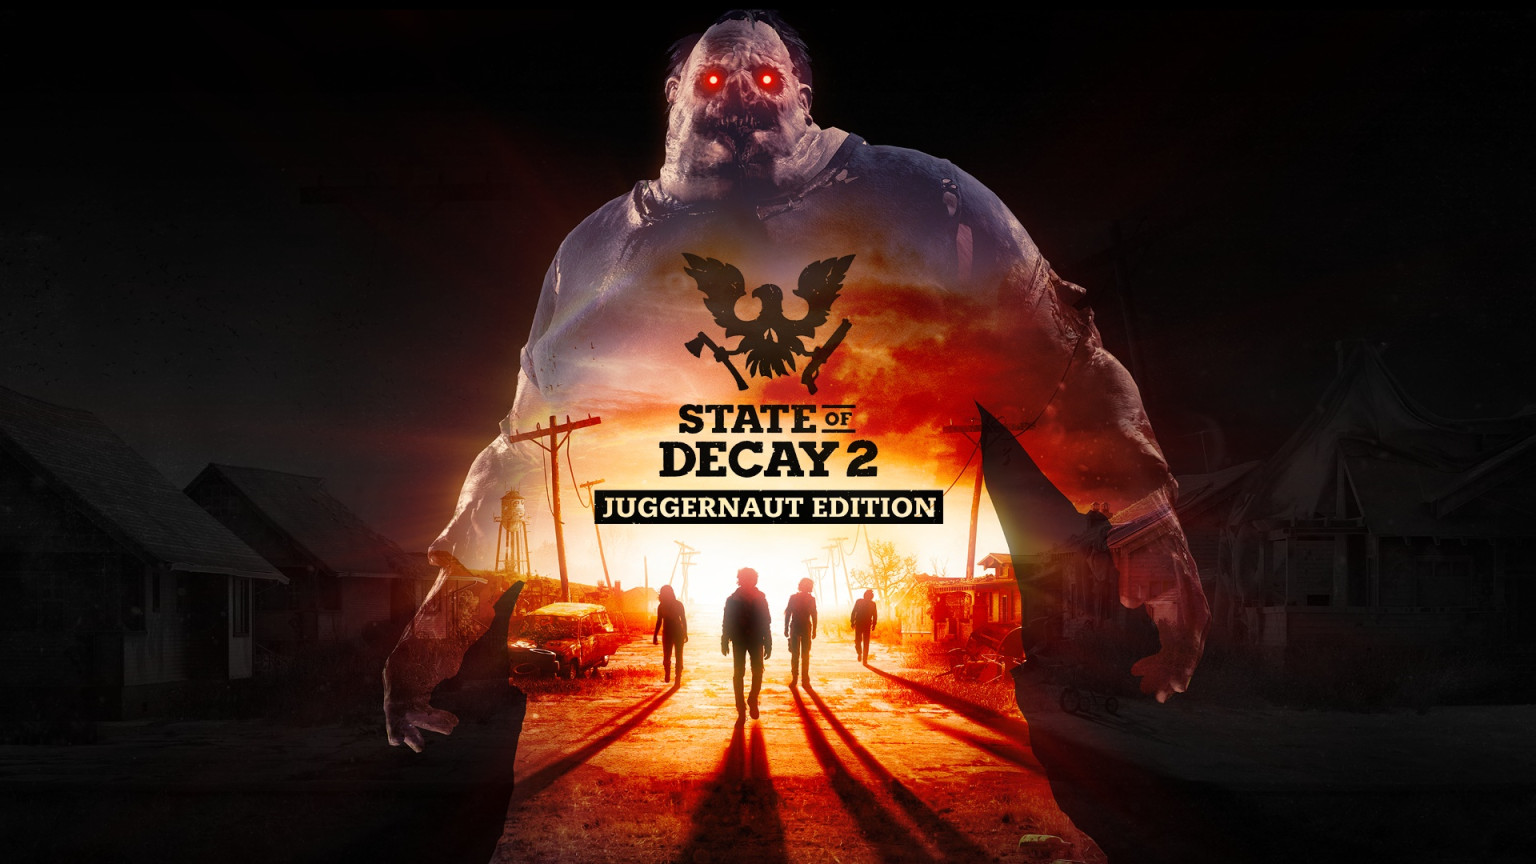 State of Decay 2 Juggernaut Edition Announced Rocket Chainsaw